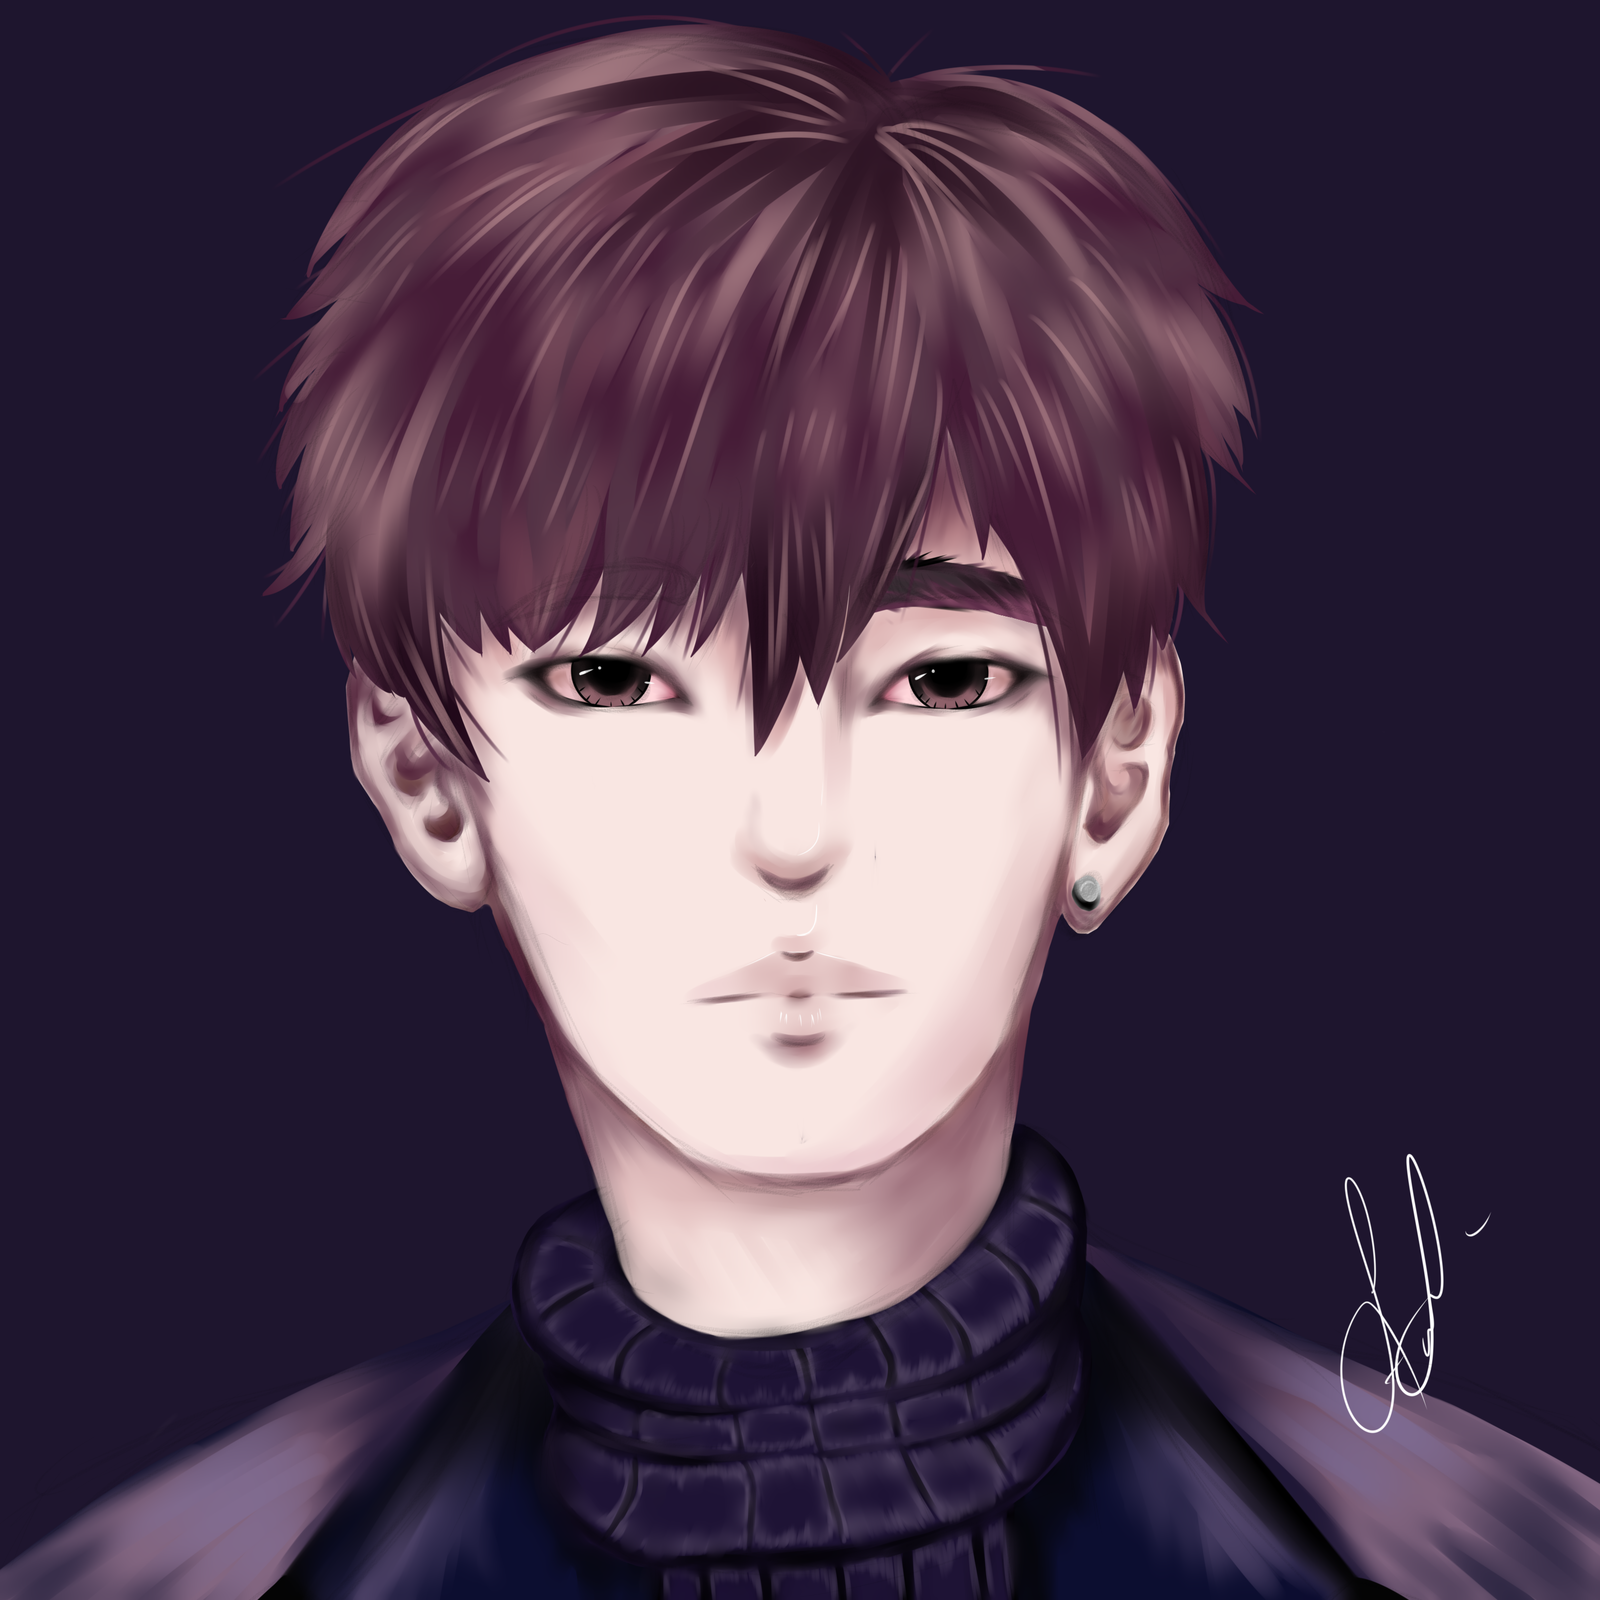 Attempts to draw V from BTS - My, Junior Academy of Artists, SAI, Bts, 